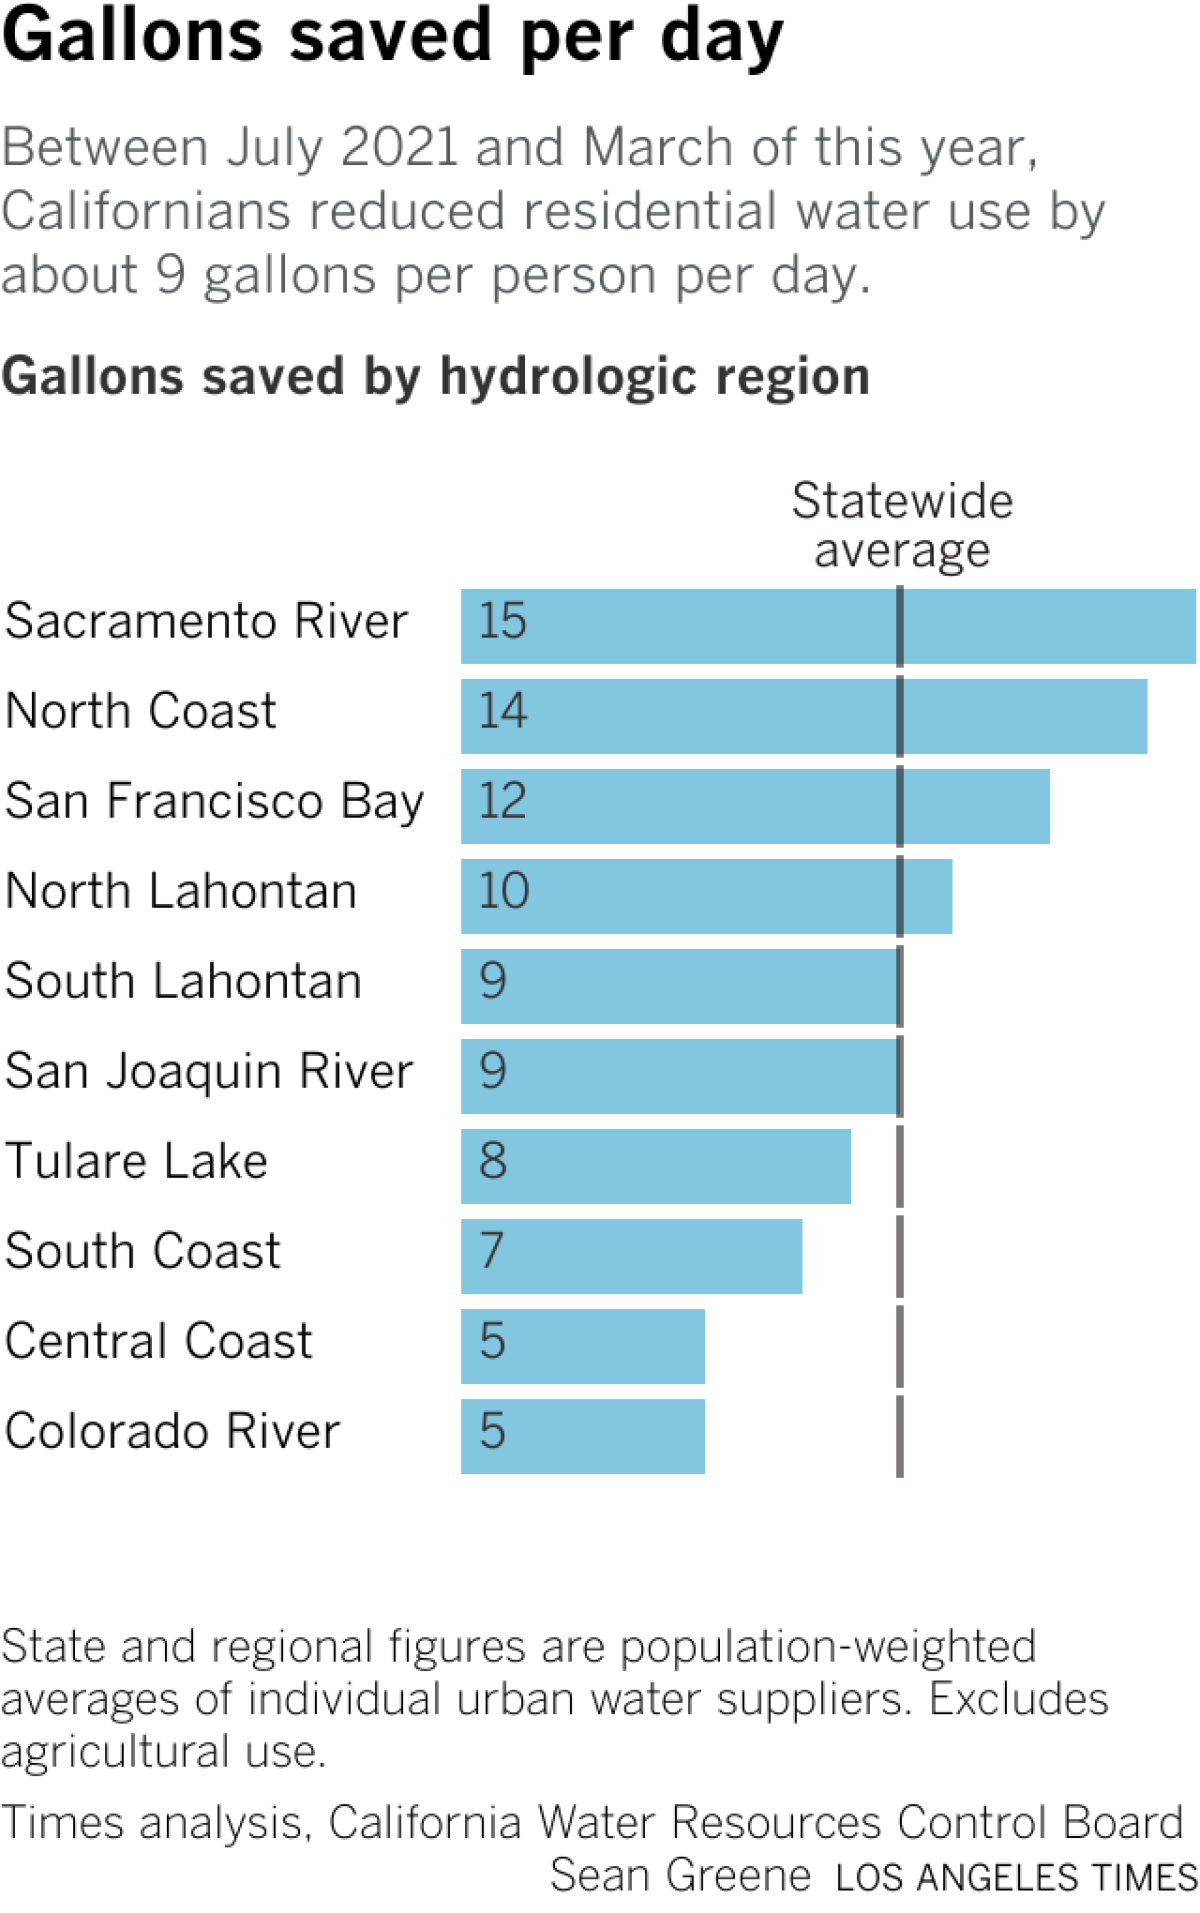 A bar chart shows a breakdown of water use reductions by hydrologic region.